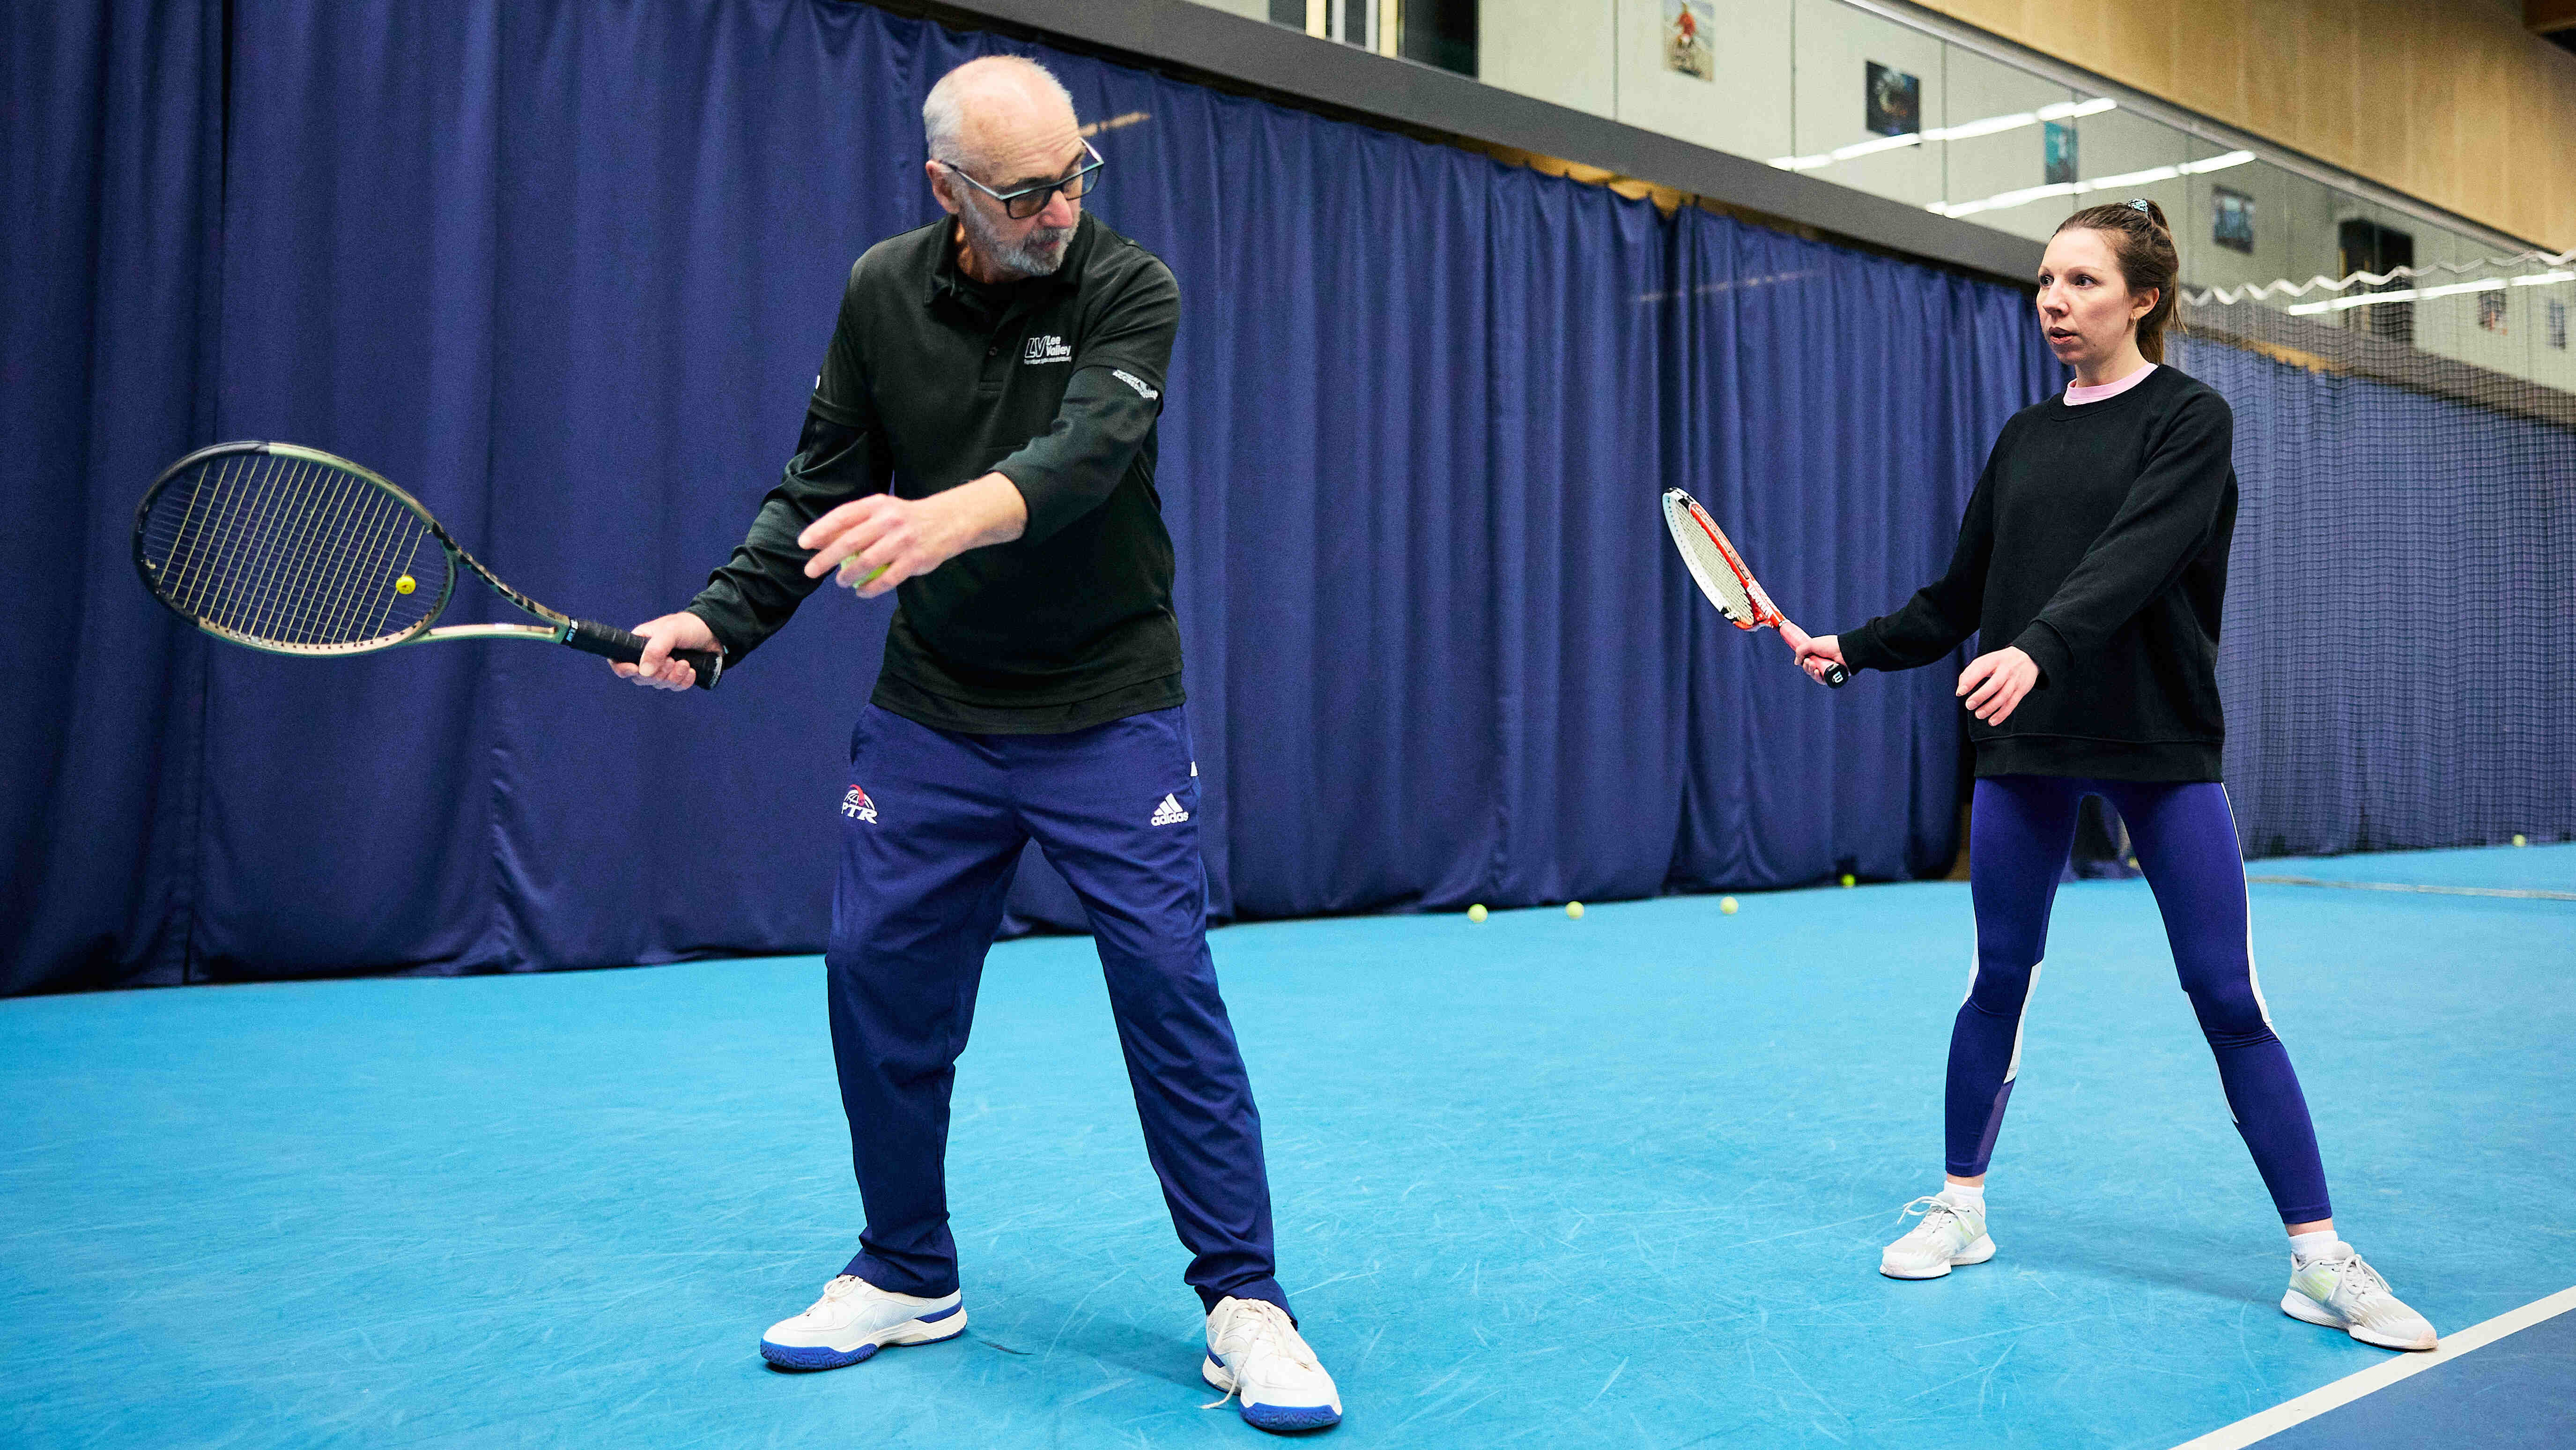 Adult Tennis Courses Lee Valley Tennis and Hockey Centre Better